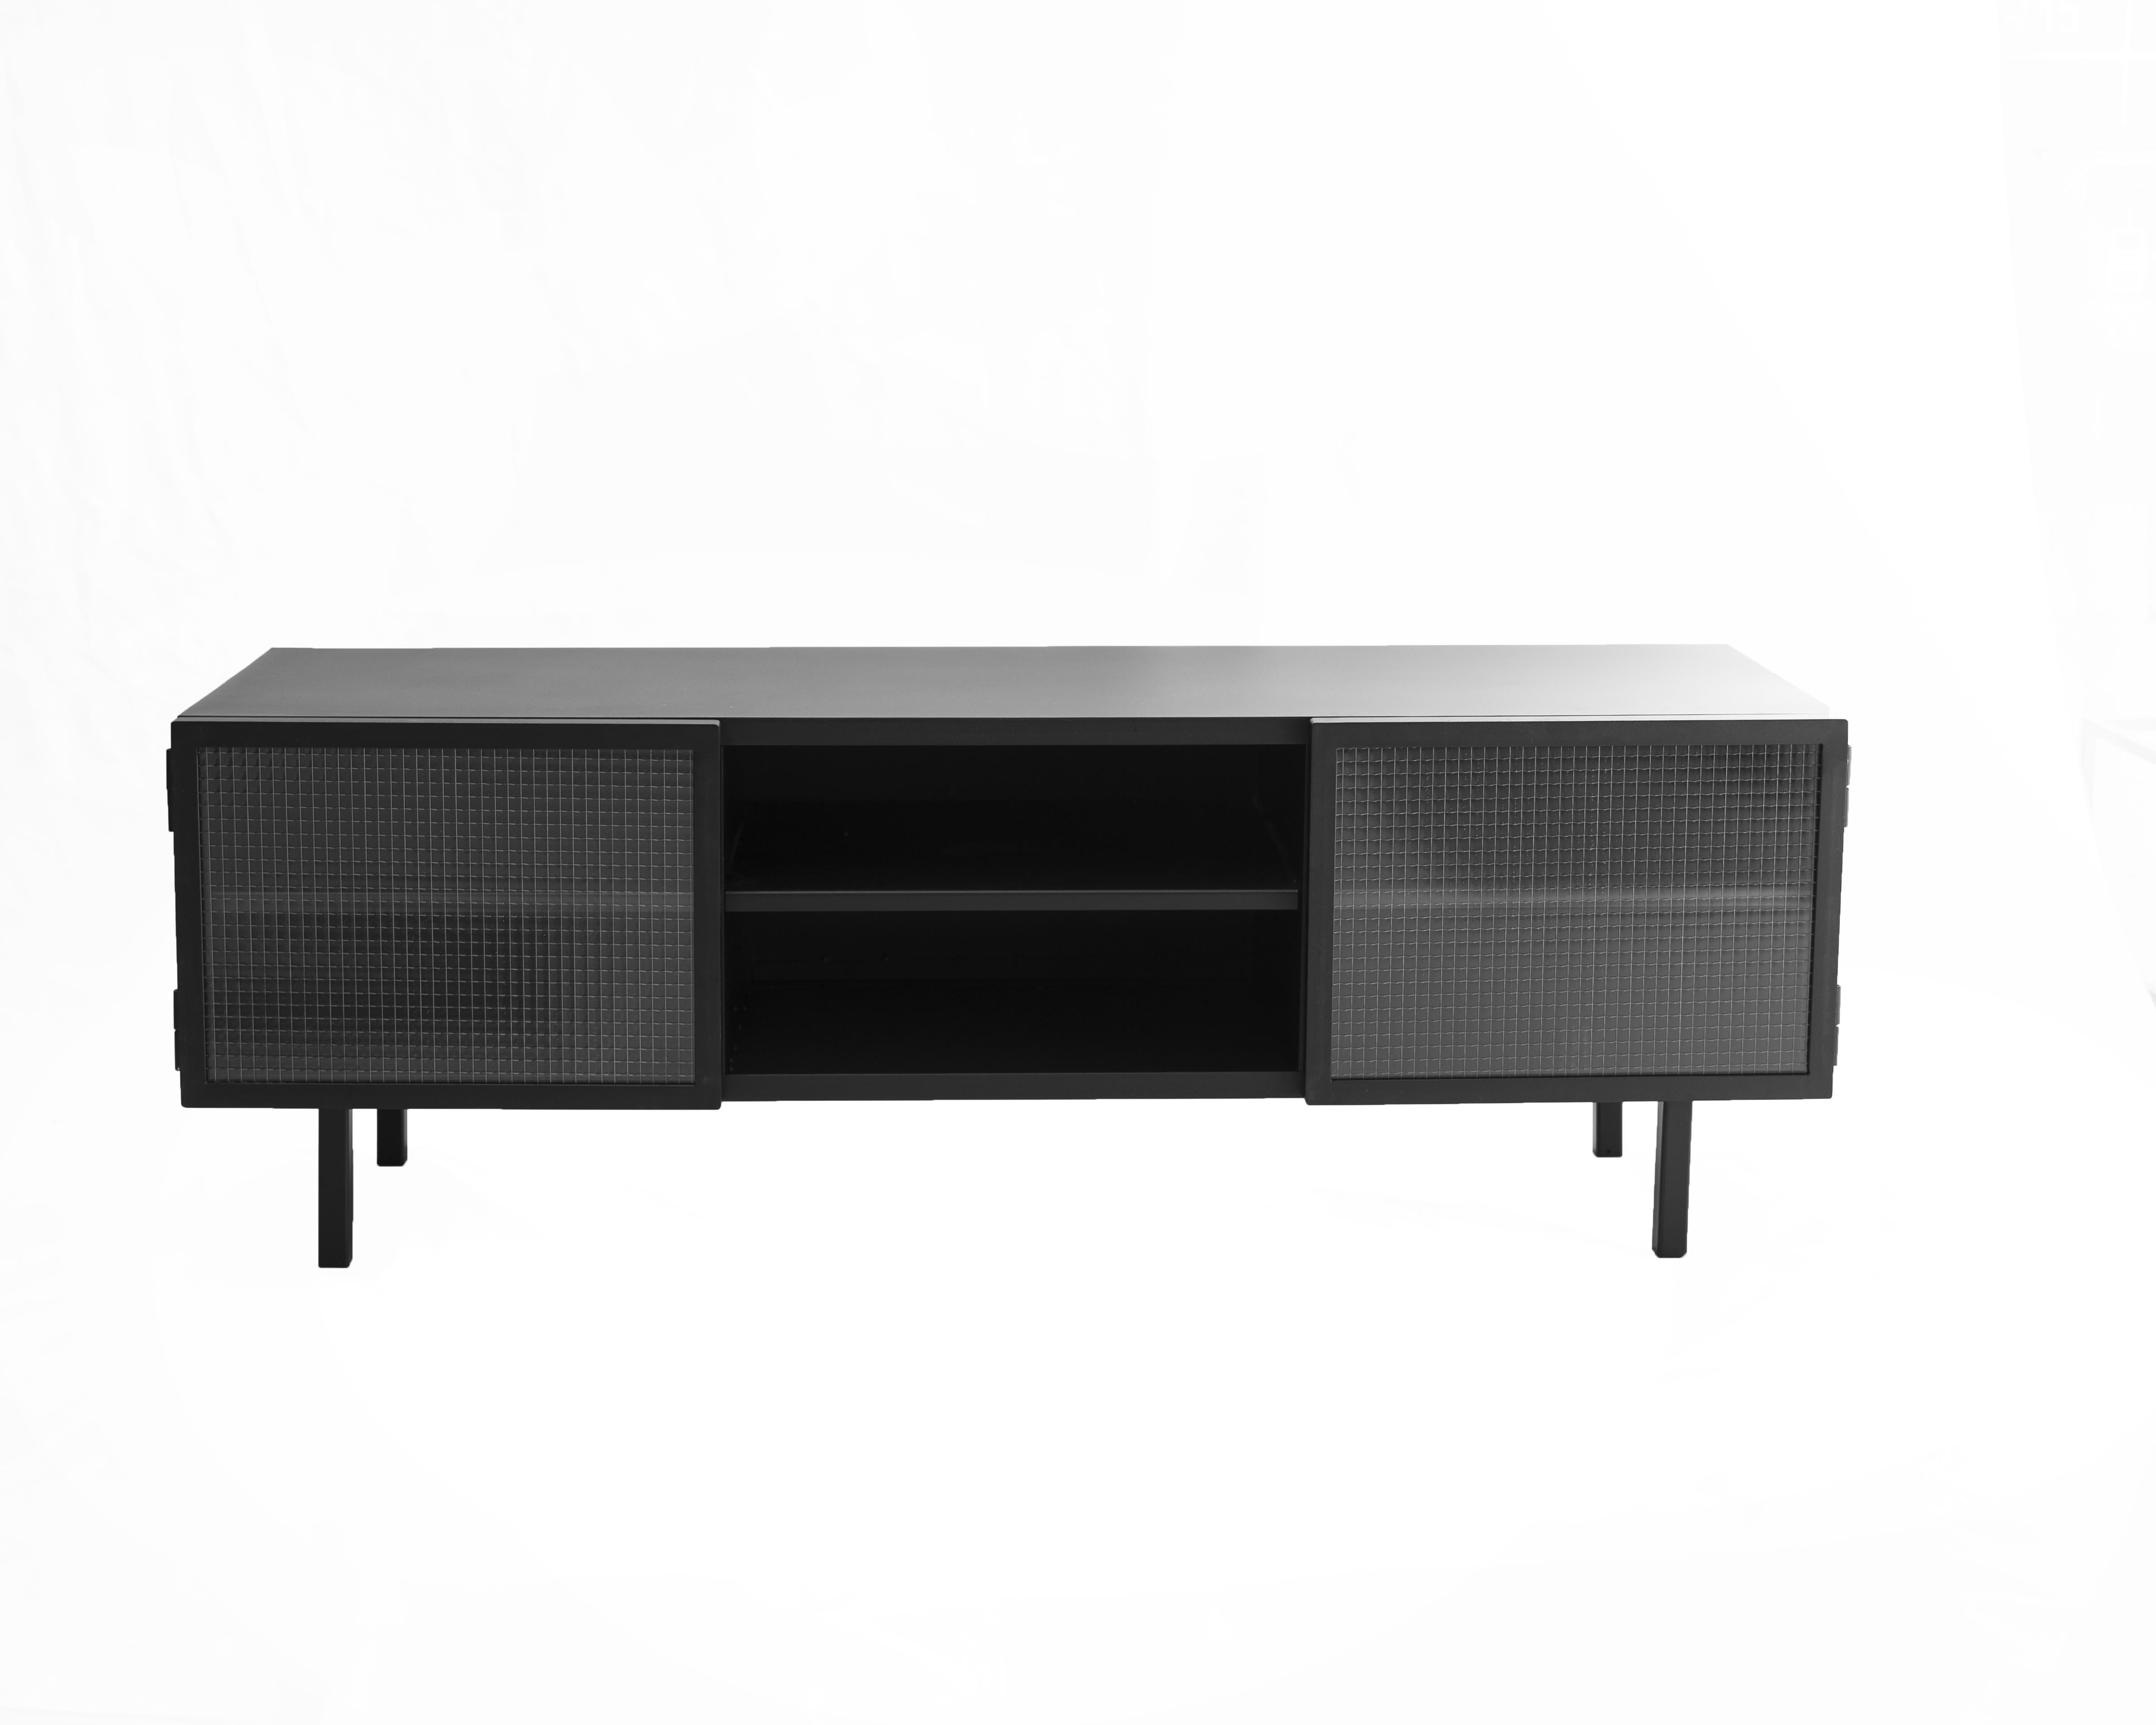 Object 023 TV cabinet by NG Design
Dimensions: D160 x W46 x H56 cm
Materials: Powder coated steel, Tempered Glass.

Also Available: All of objects available in different materials and colors on demand. 

Put your electronics in the middle,